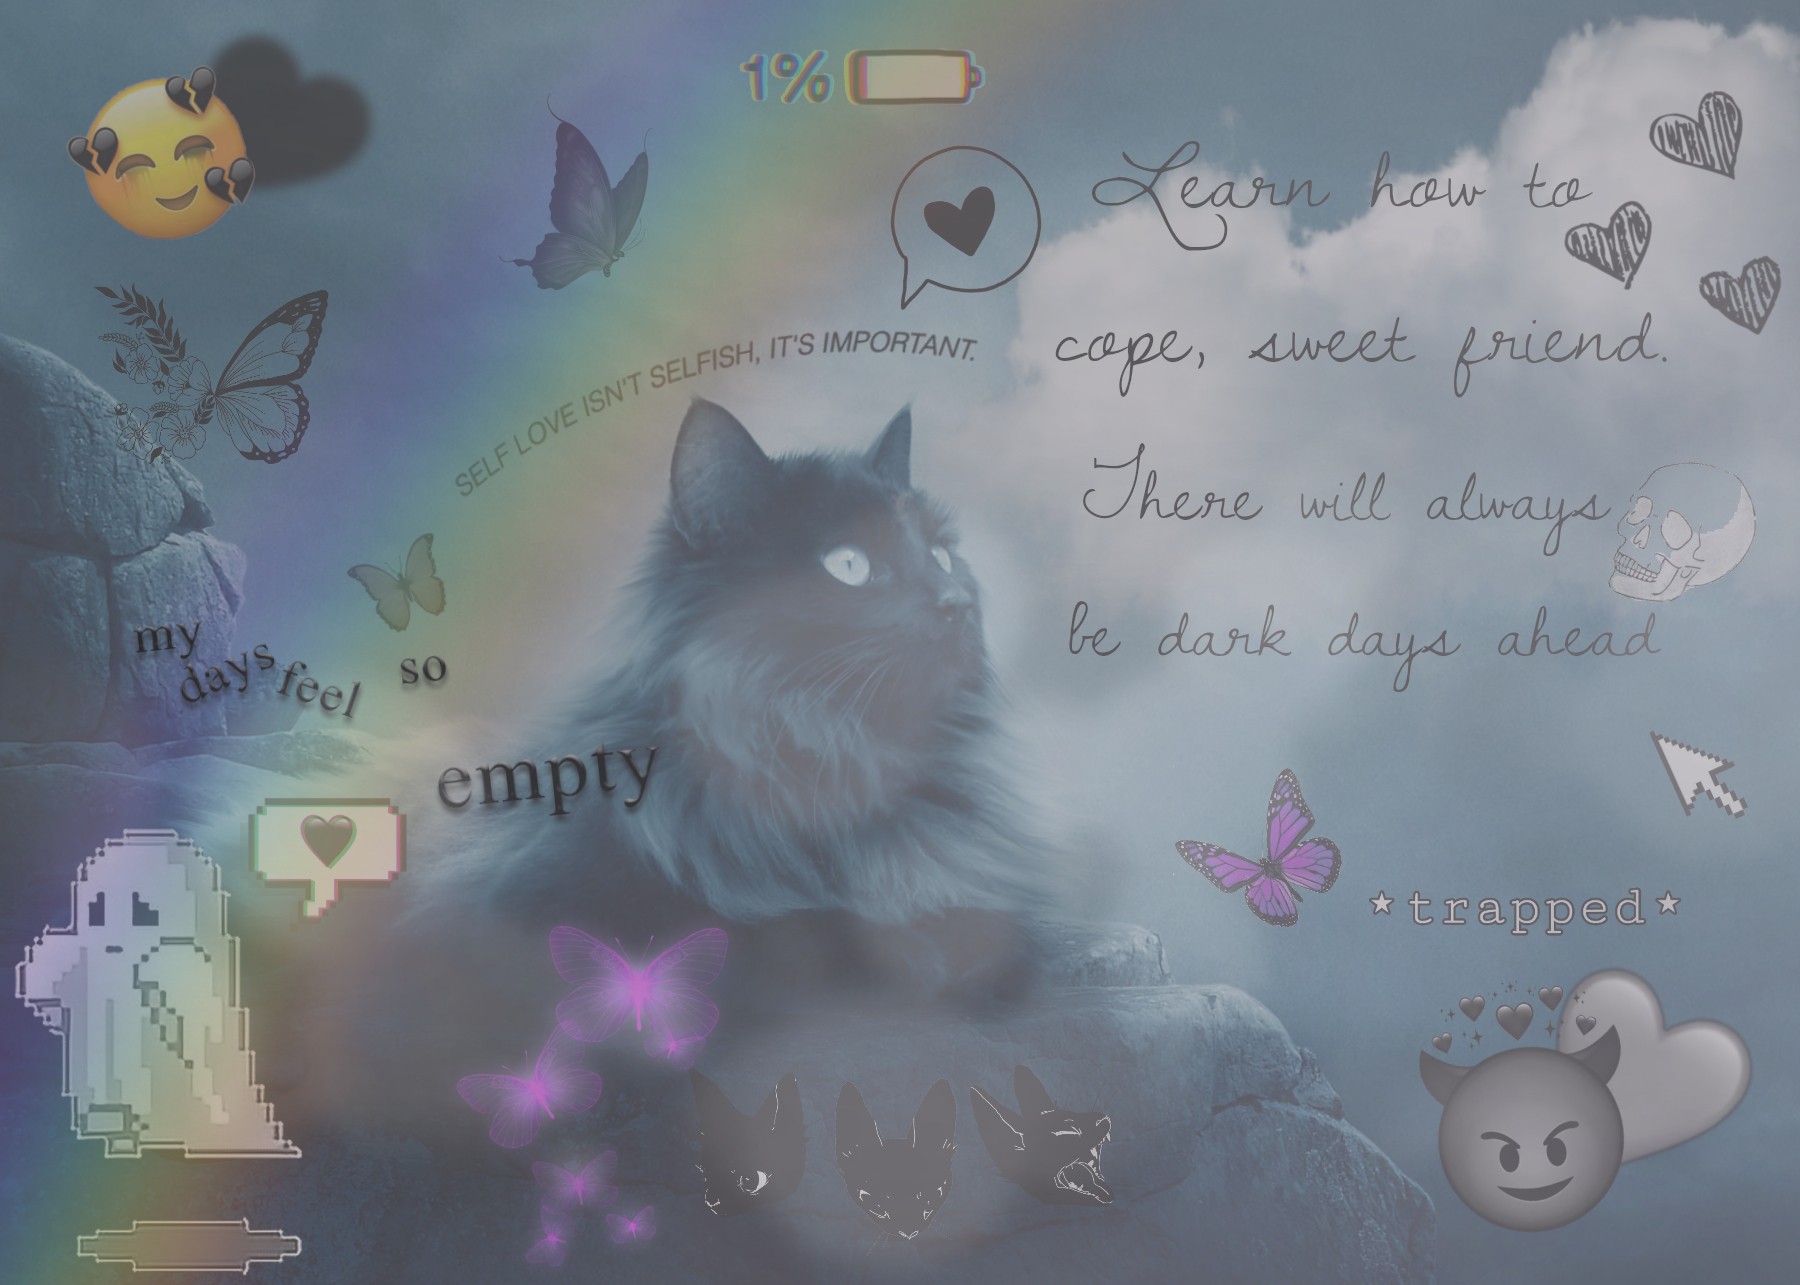 🐈🖤🐈‍⬛

Dark Cat Aesthetic 

Sorry I come back a bit dark 😅 Promise there isn't anything wrong with me mentally. It just went with the image and quote I chose 🤷‍♀️